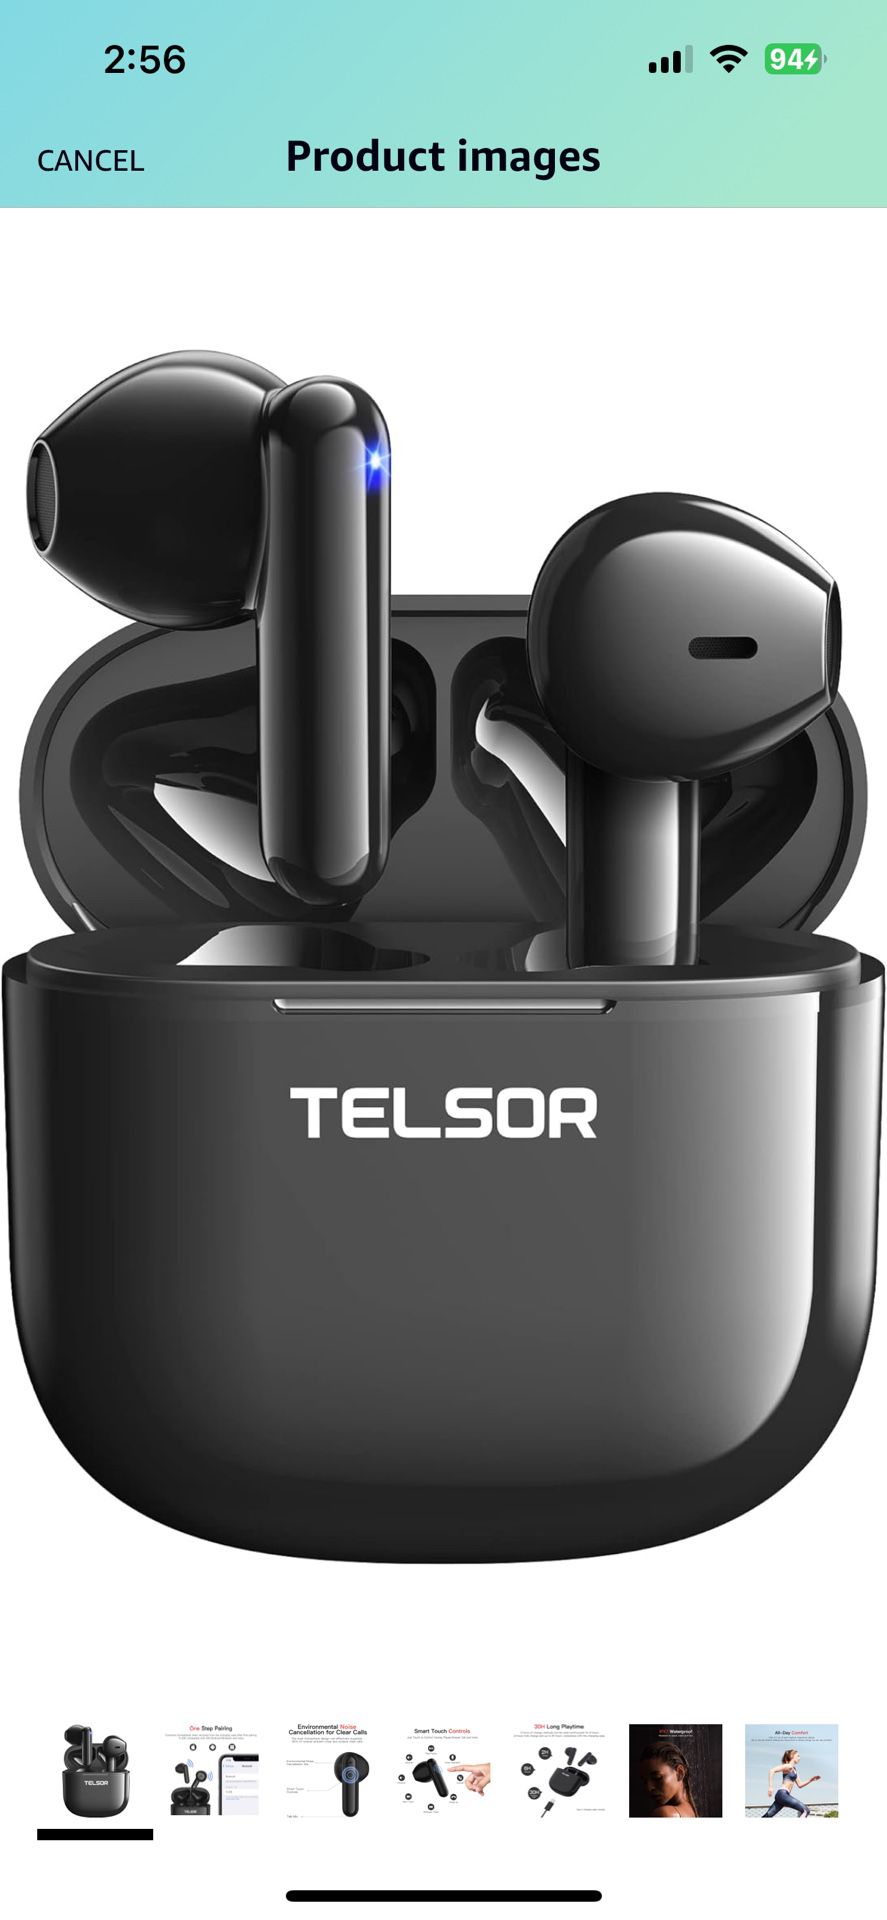 TELSOR Wireless Earbuds for iPhone, Touch Control Stereo Sound Bluetooth Earphones Noise Canceling Earbuds Wireless for Calls, 30H Playtime, IPX7 Wate